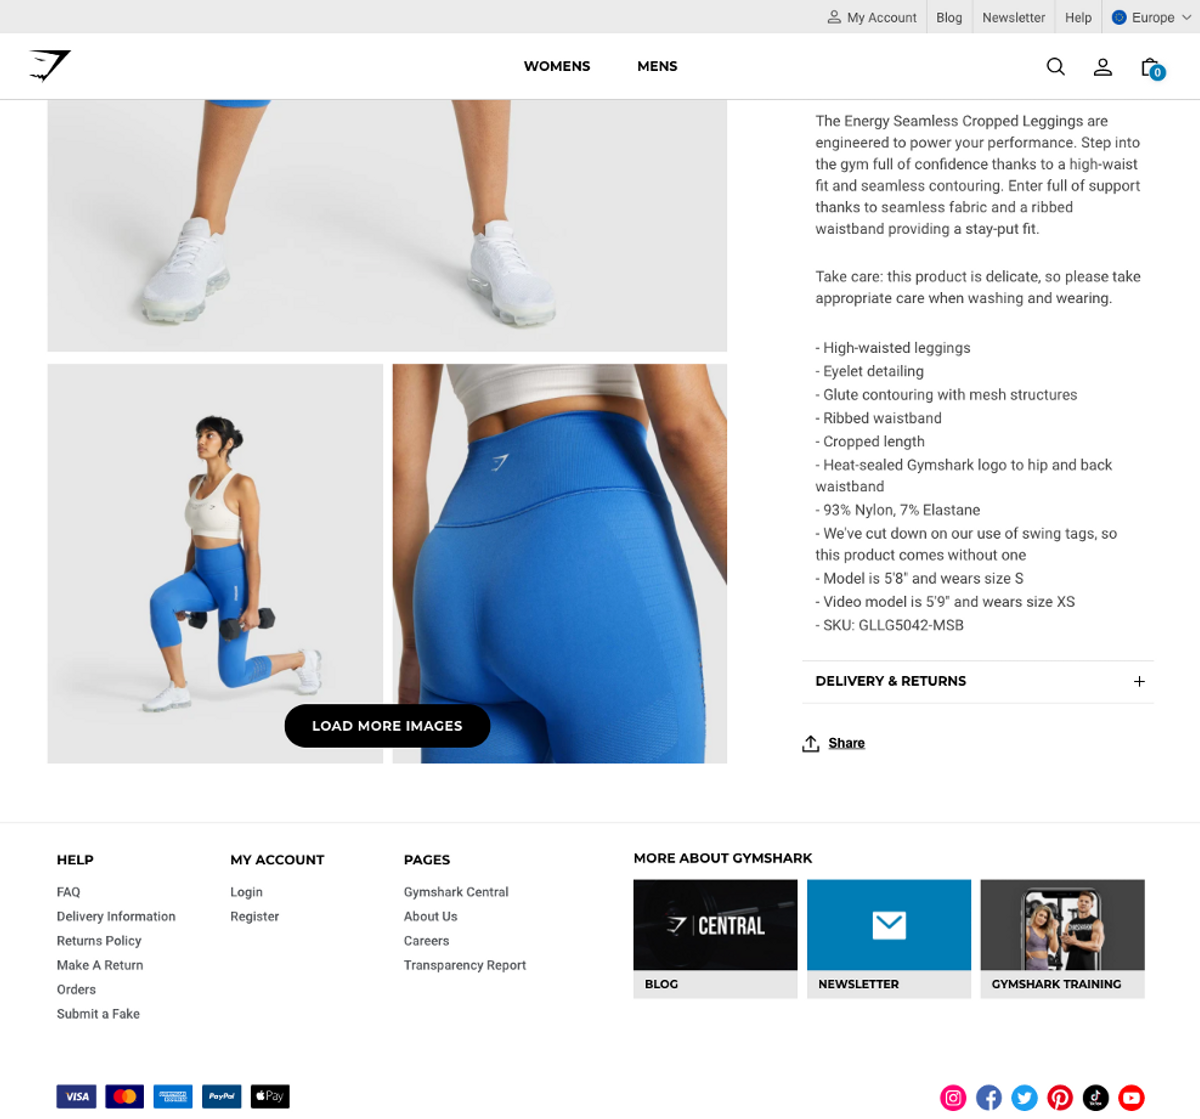 Gym Shark product page